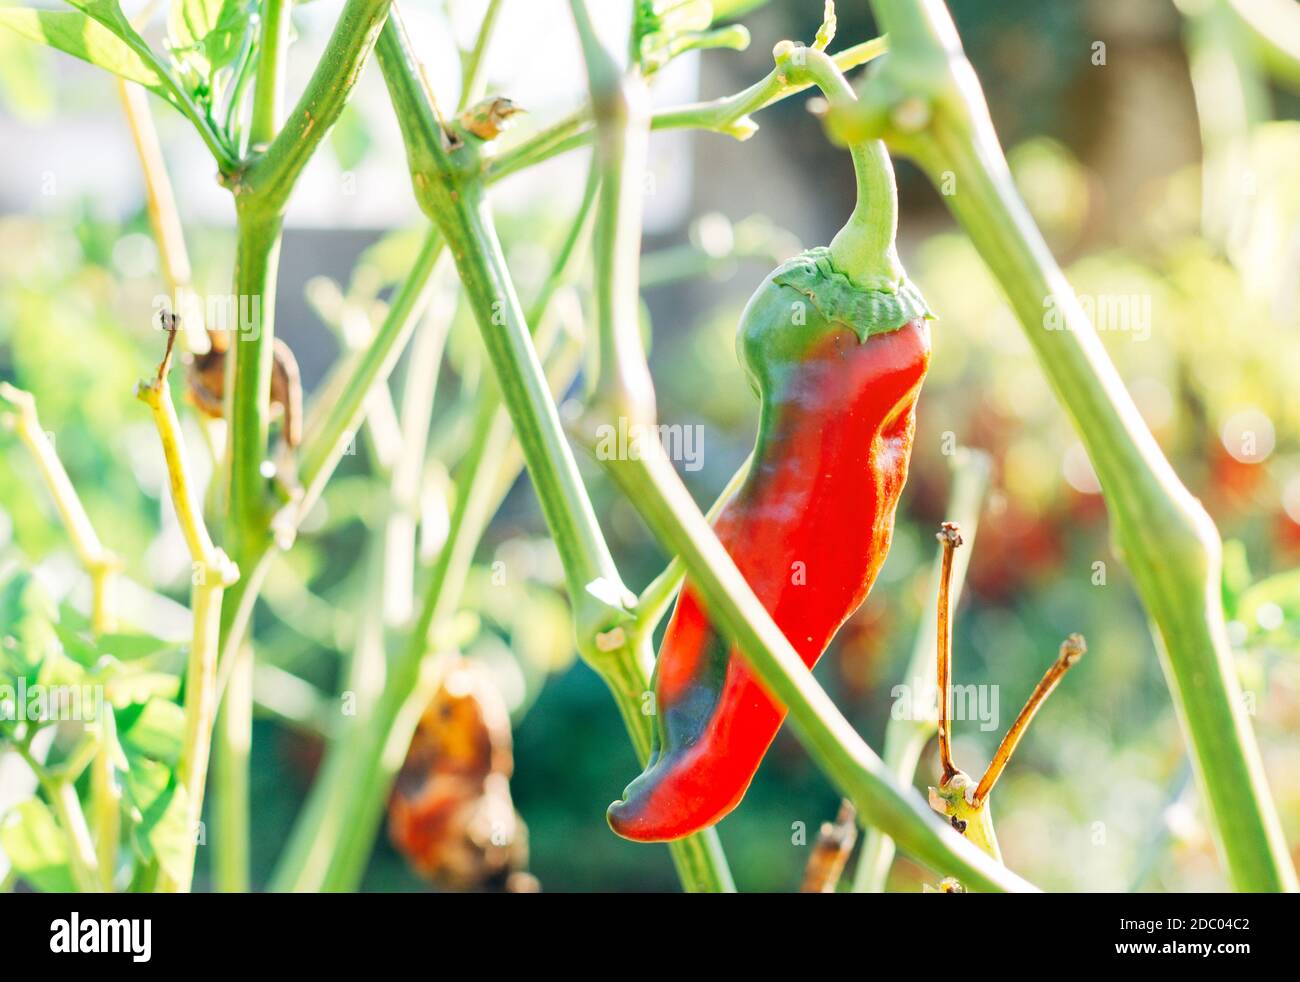 Red pepper on the plant. Stock Photo